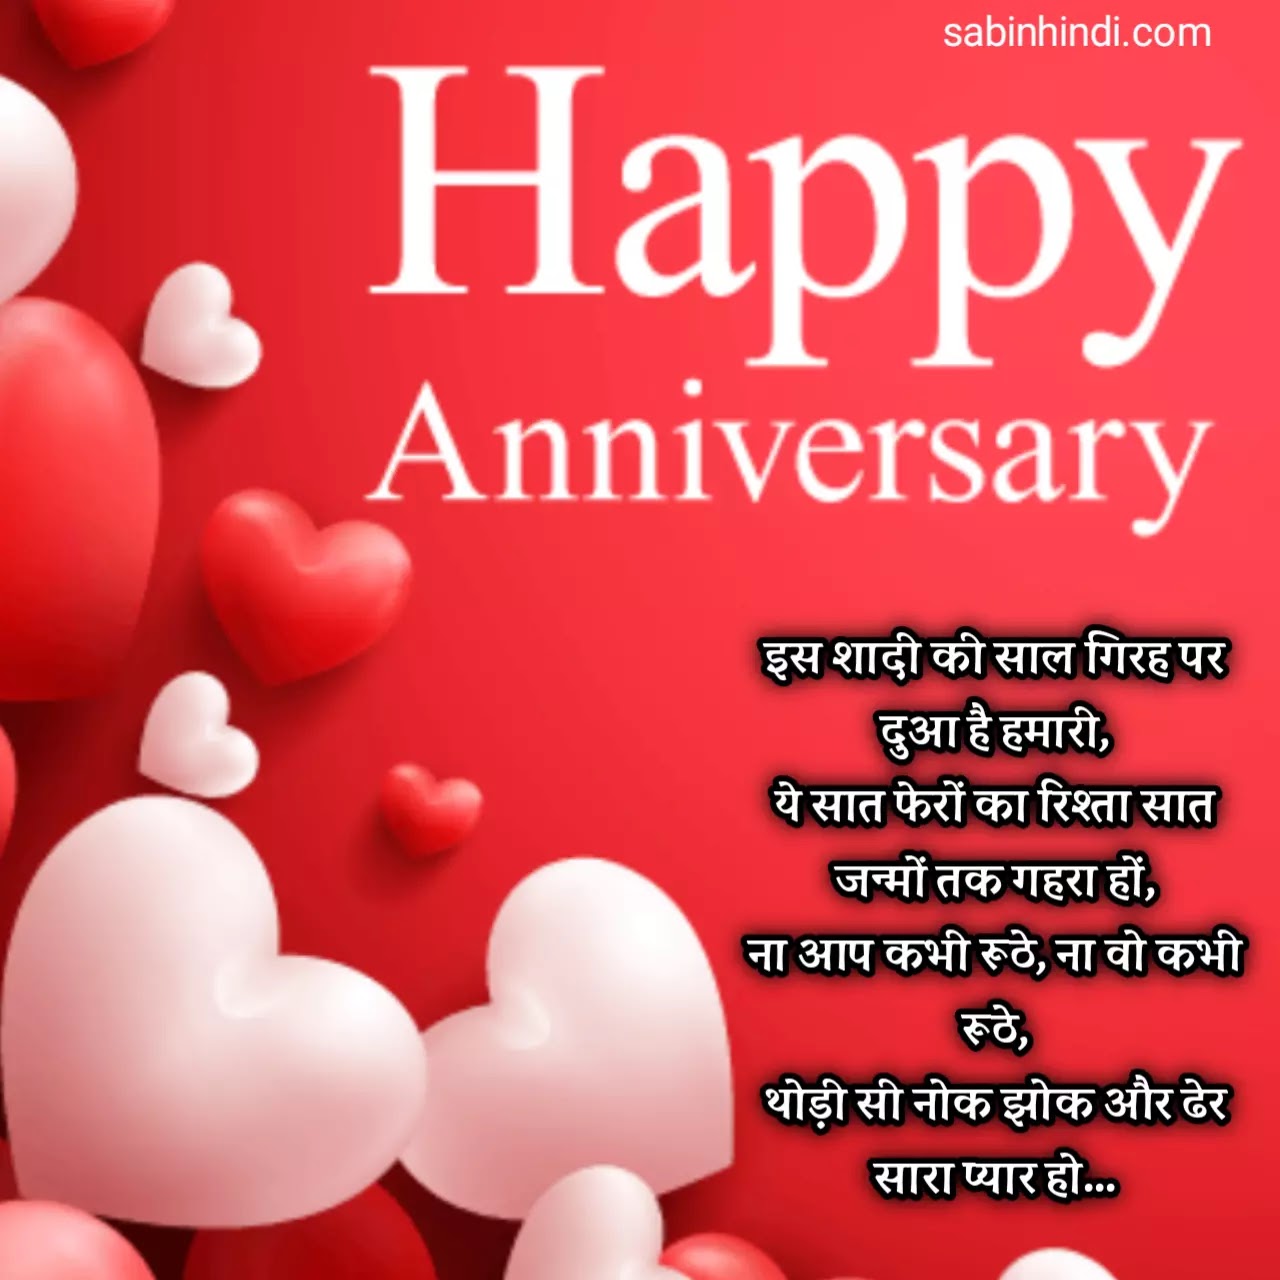 Happy marriage anniversary best wishes Images • Lazy girl ...